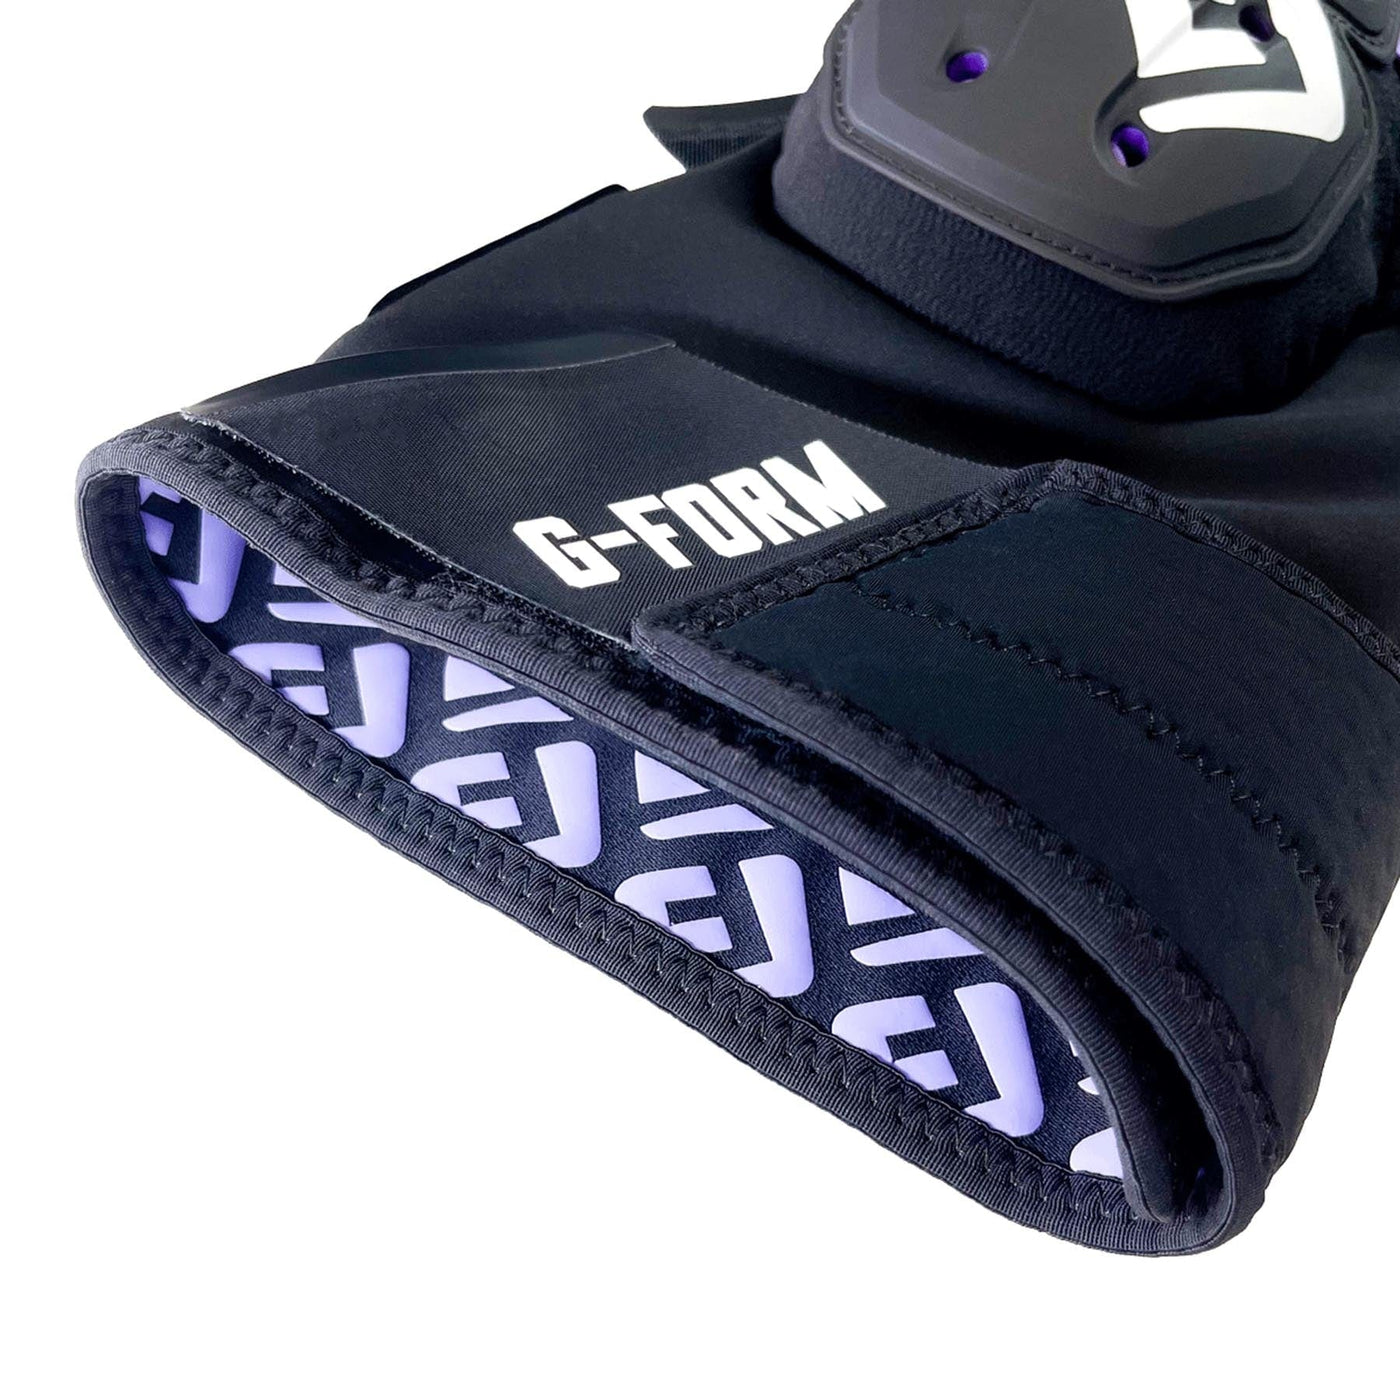 G-Form Knee Guards RE ZRO Mesa - Black 8Lines Shop - Fast Shipping